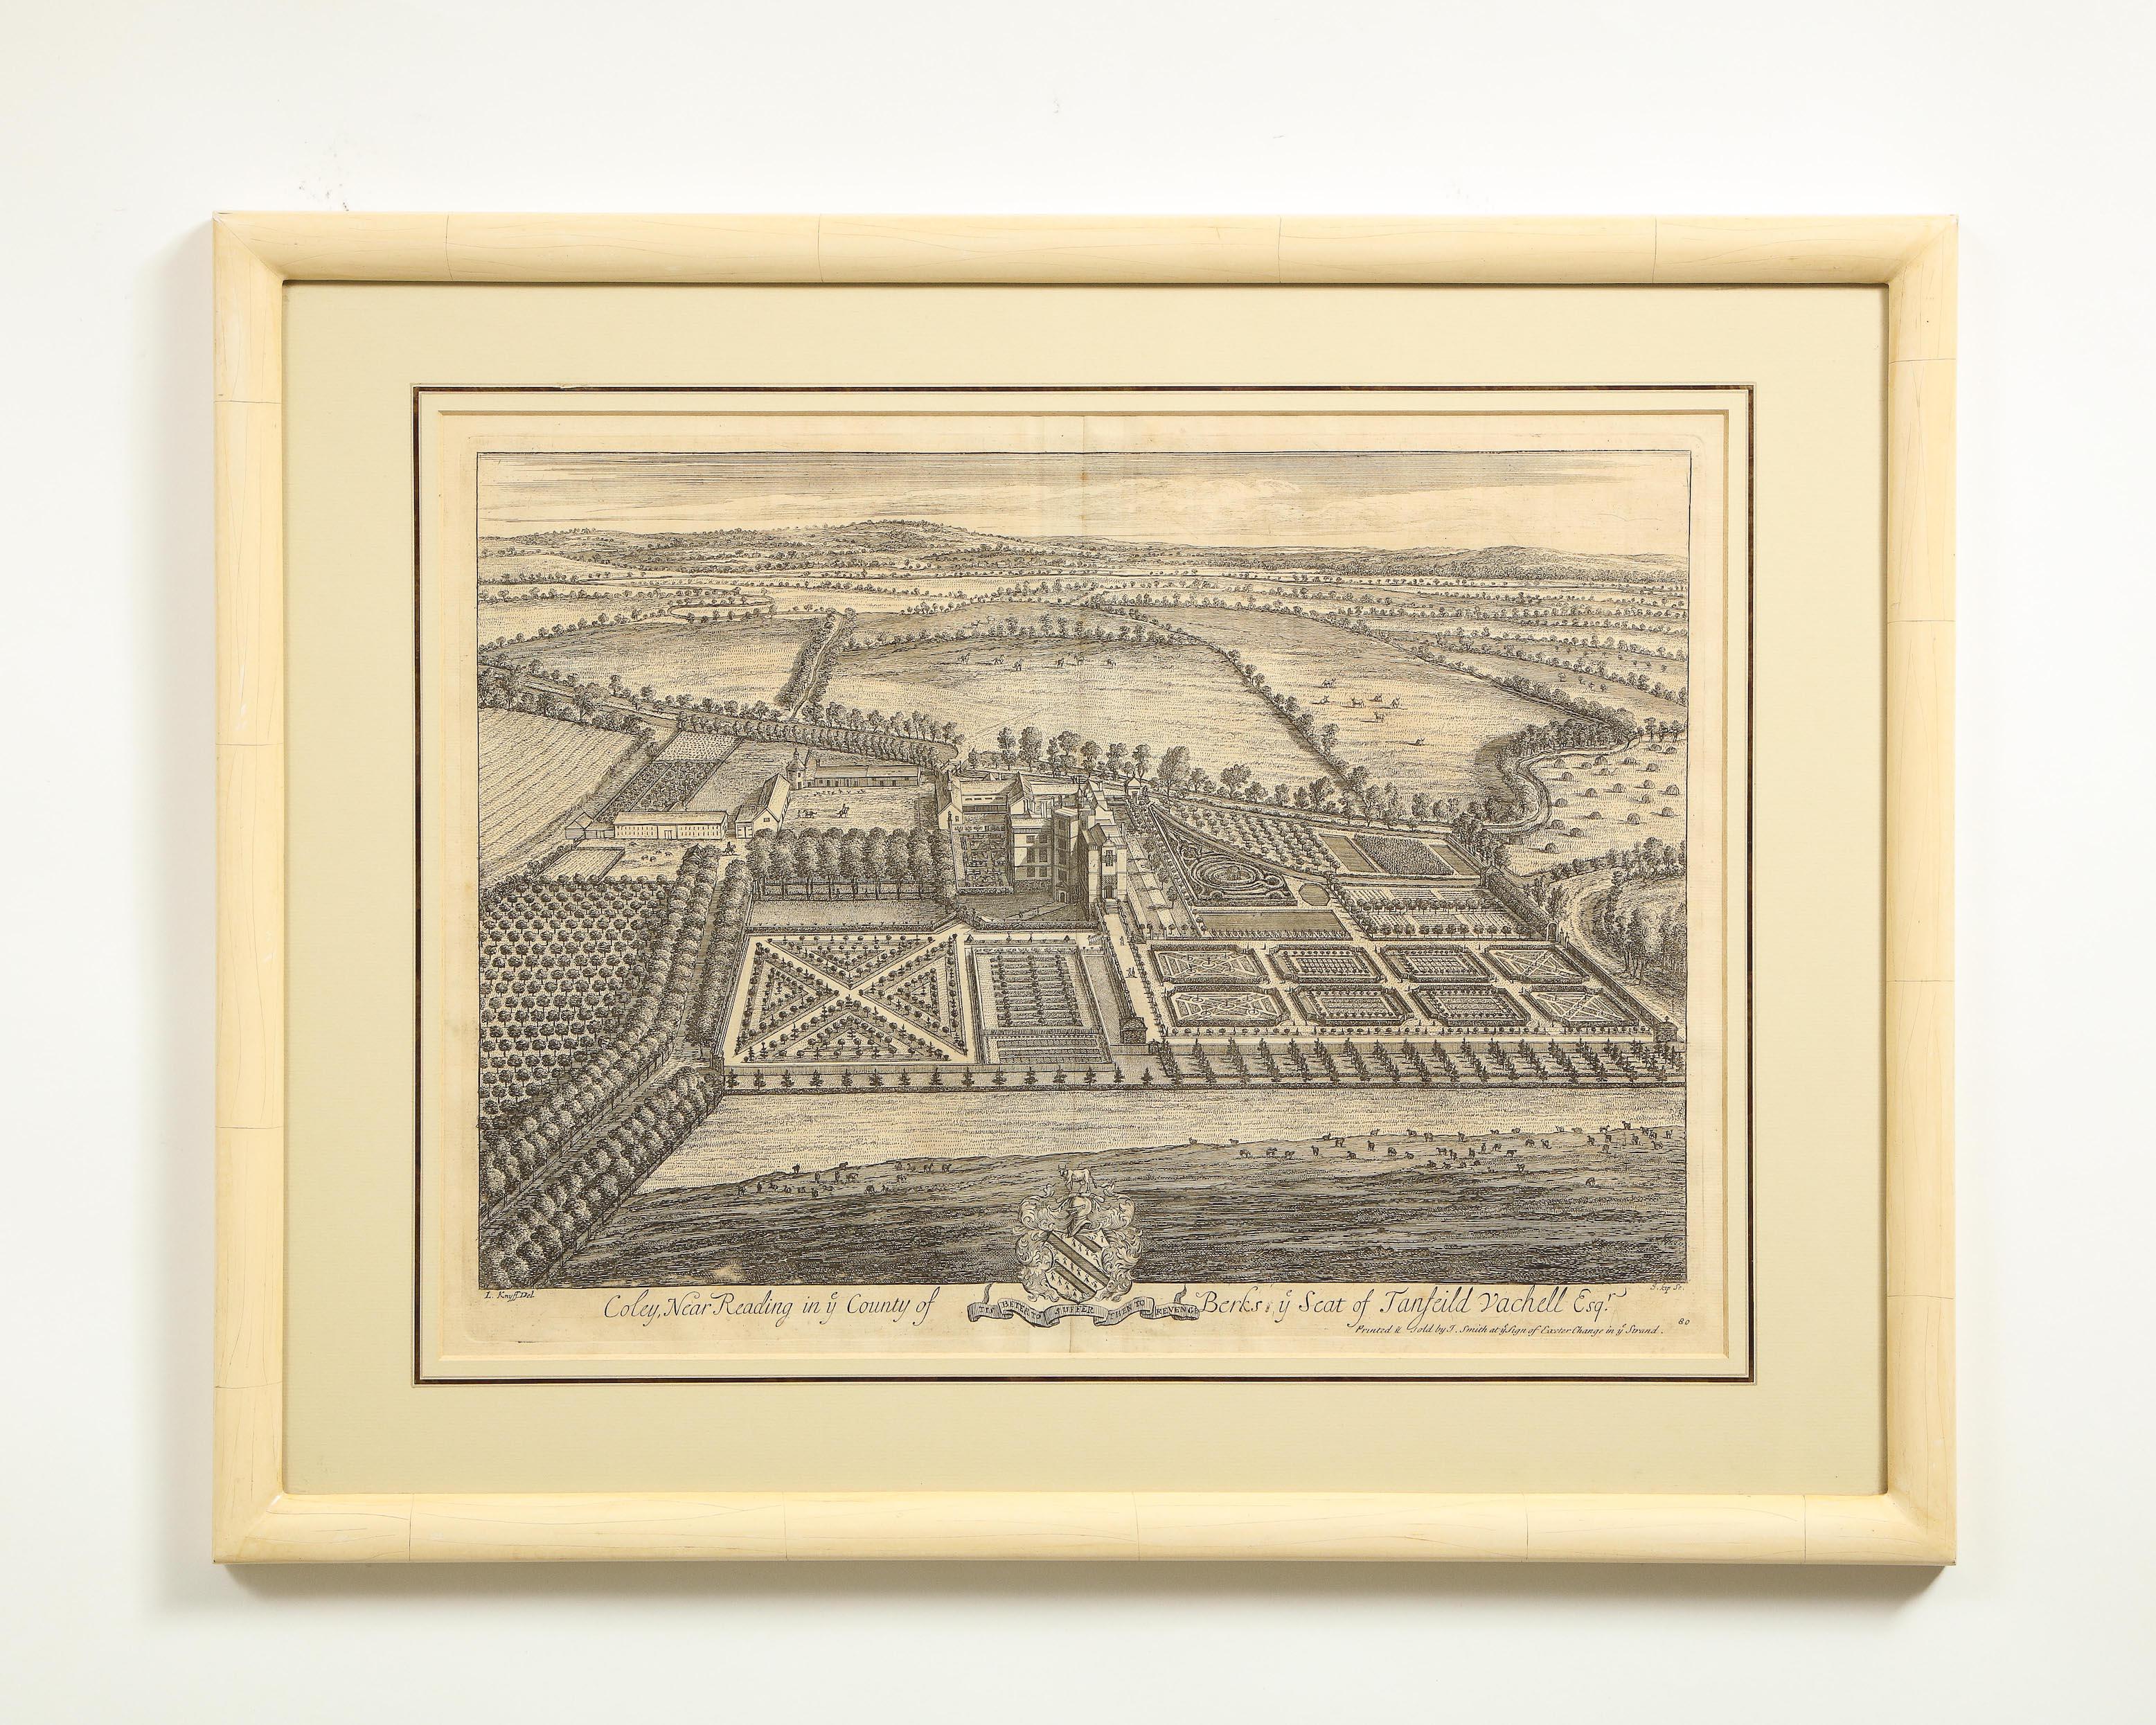 Engraved views of various country estates belonging to British nobility and gentry originally published in the Britannia Illustrata, also known as Views of Several of the Queens Palaces and also of the Principal Seats of the Nobility & Gentry of